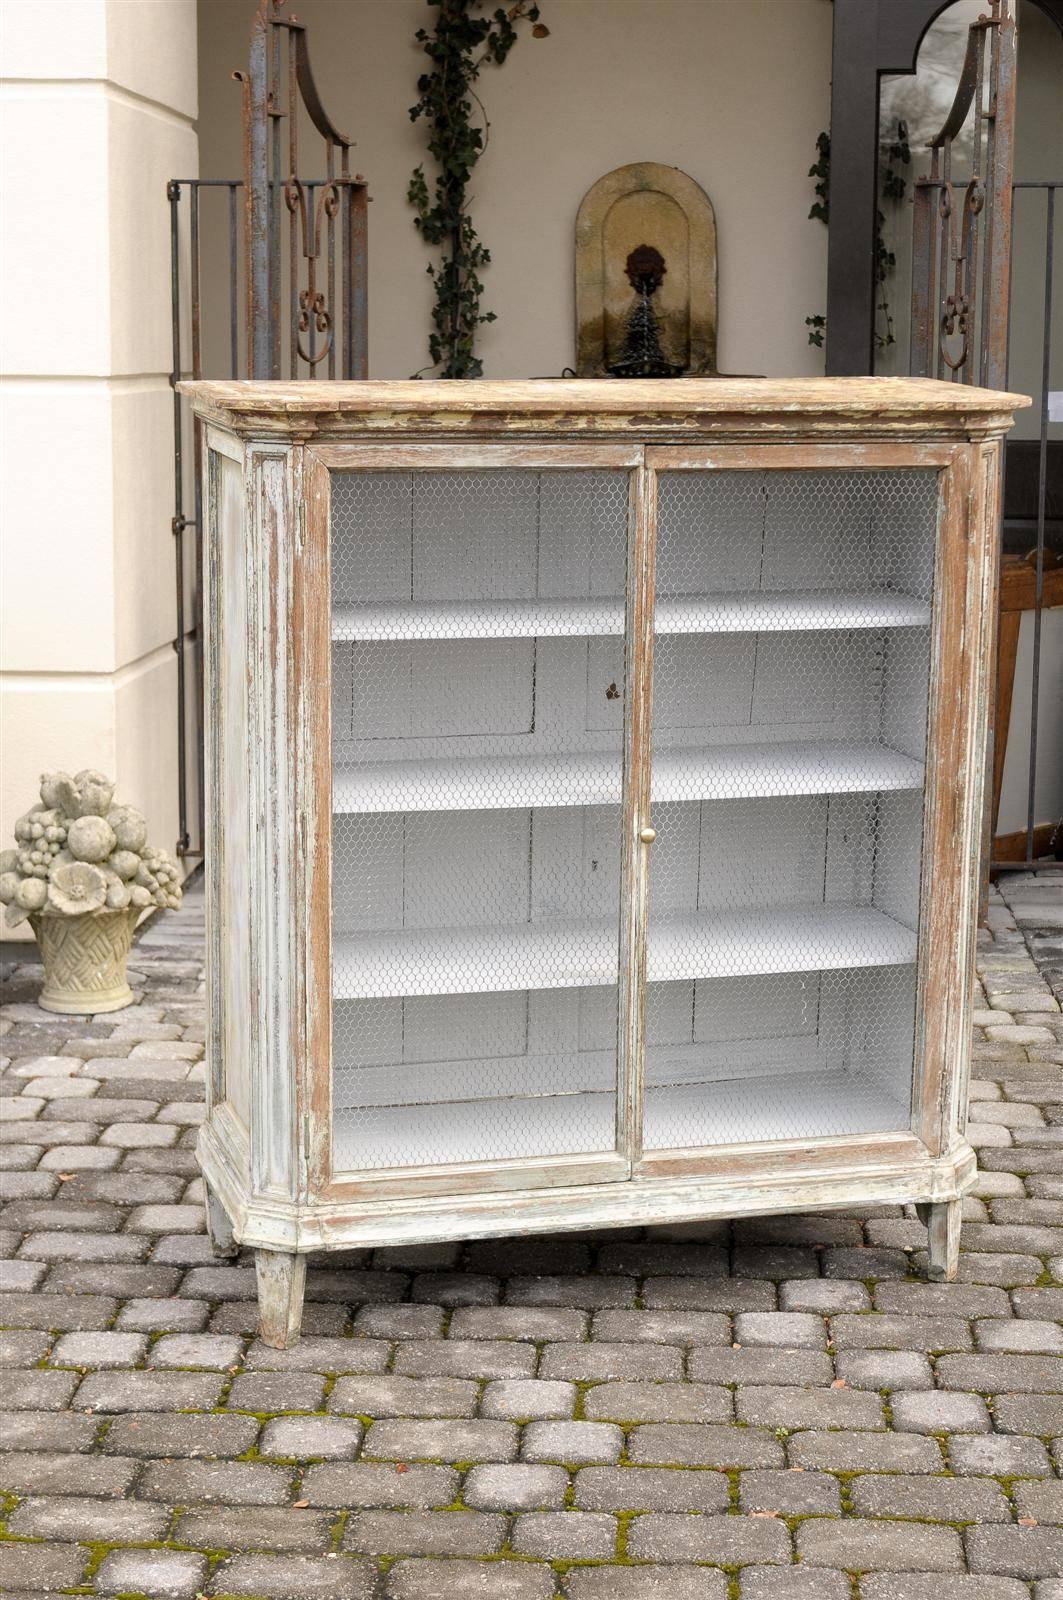 This French painted wood cabinet from the mid-19th century features two wire decorated doors. These chicken wire doors enclose four inner shelves, which would allow perfect storage of plates and dishes. The linear profile of this French piece, circa